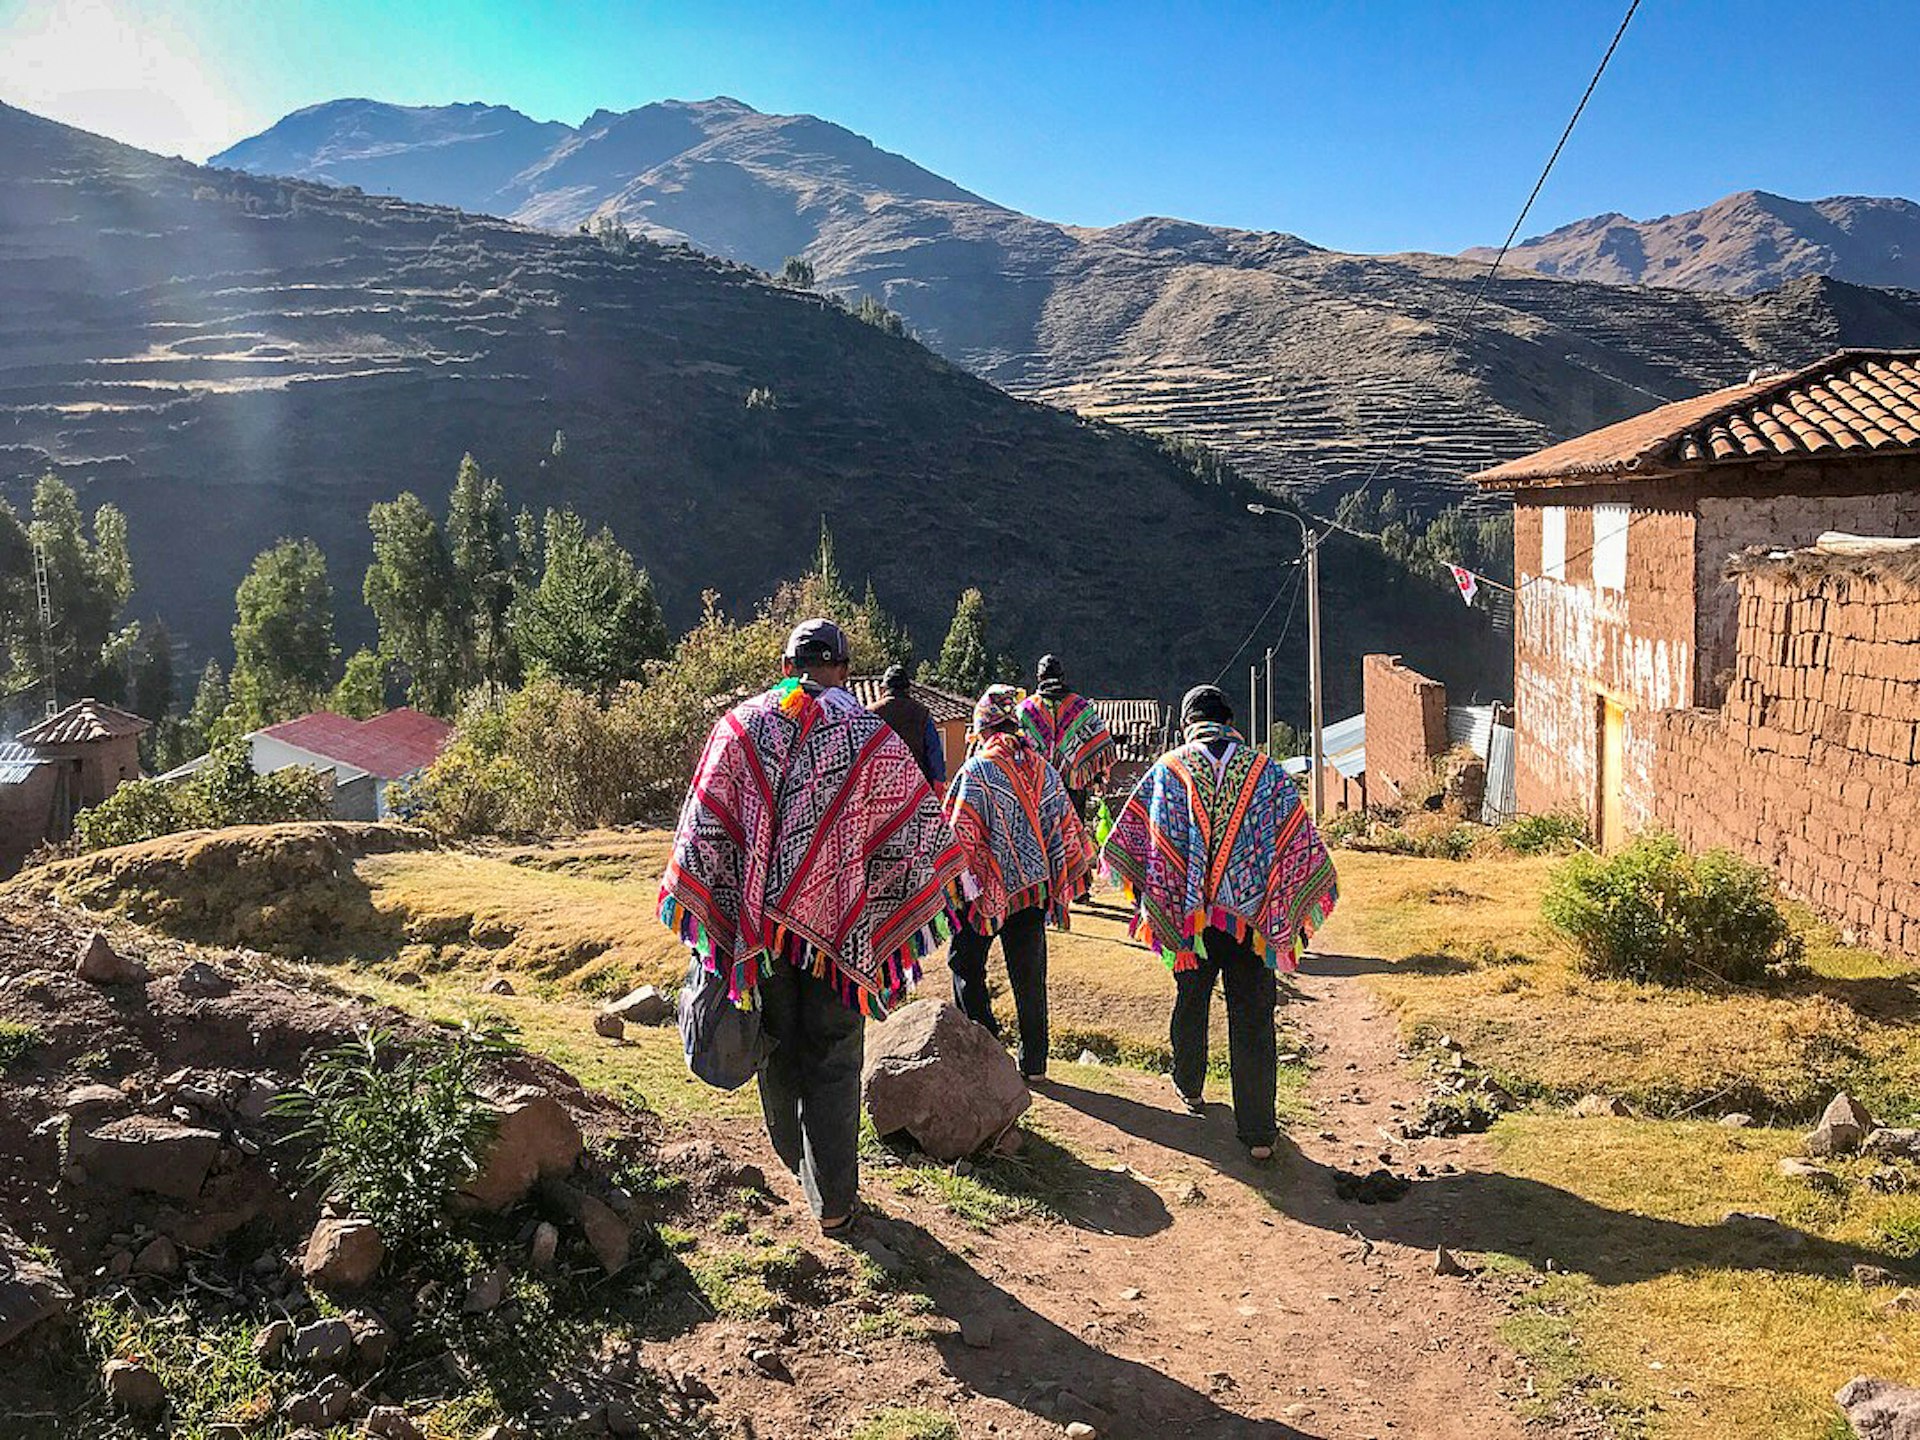 Five men in colorful Andean ponchos walk down a dirt path with a view of mountains in the background